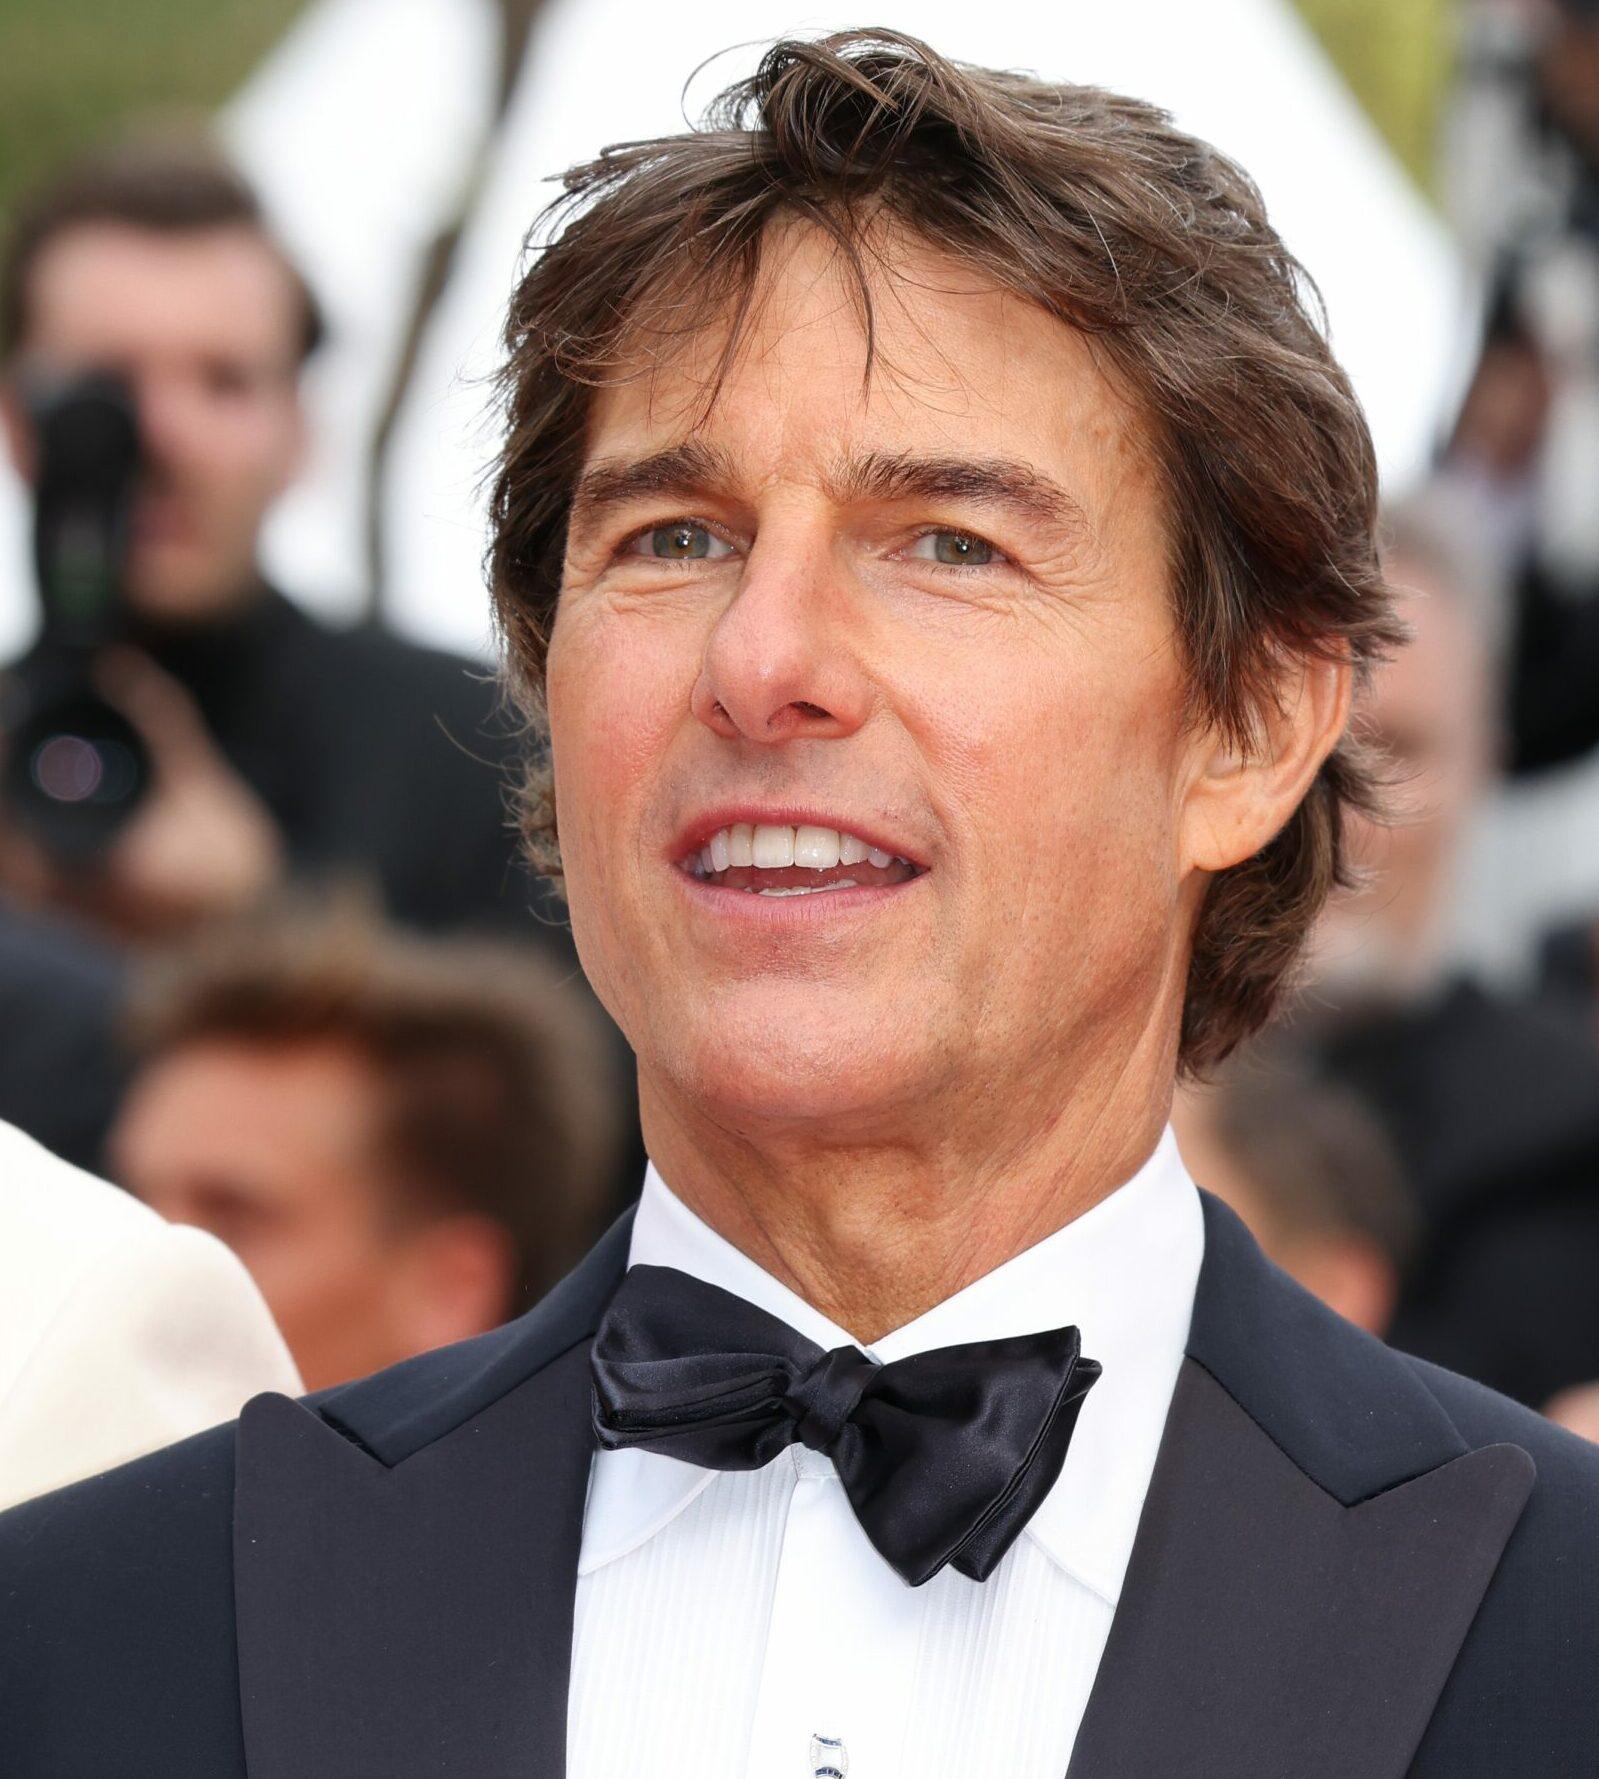 The screening of "Top Gun: Maverick" during the 75th annual Cannes film festival at Palais des Festivals on May 18, 2022 in Cannes, France. 18 May 2022 Pictured: Tom Cruise.